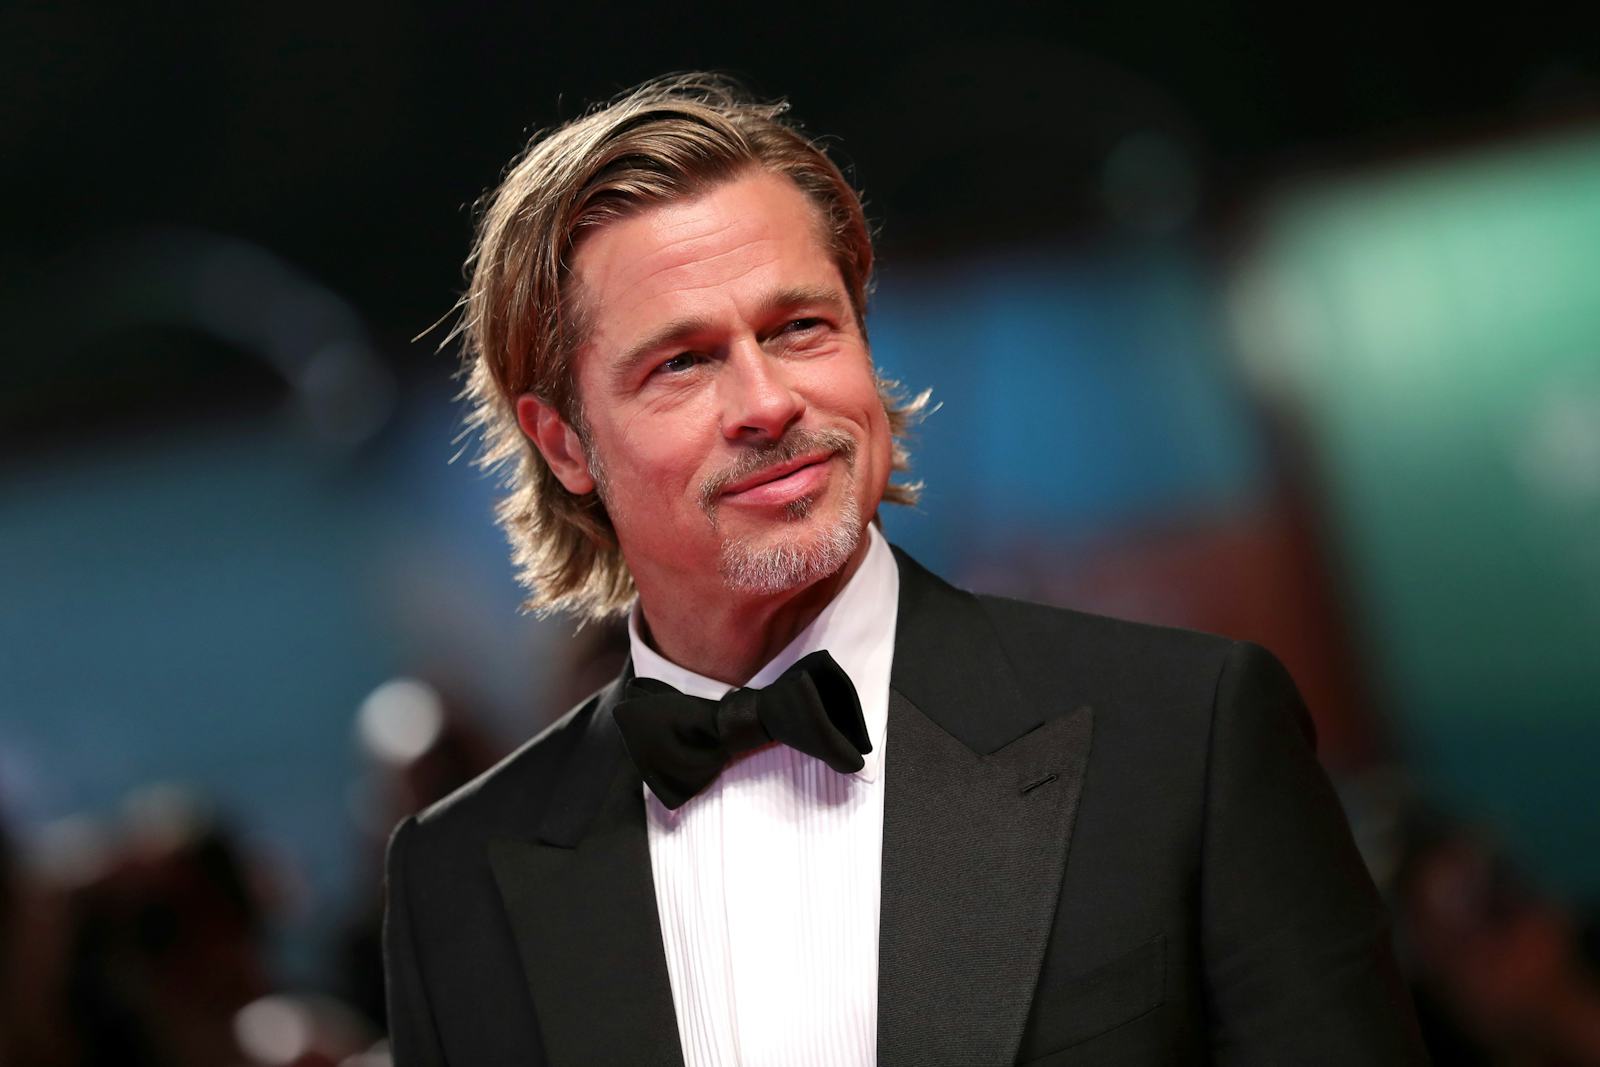 Brad Pitt’s Net Worth He's Paid This Much For His Movies